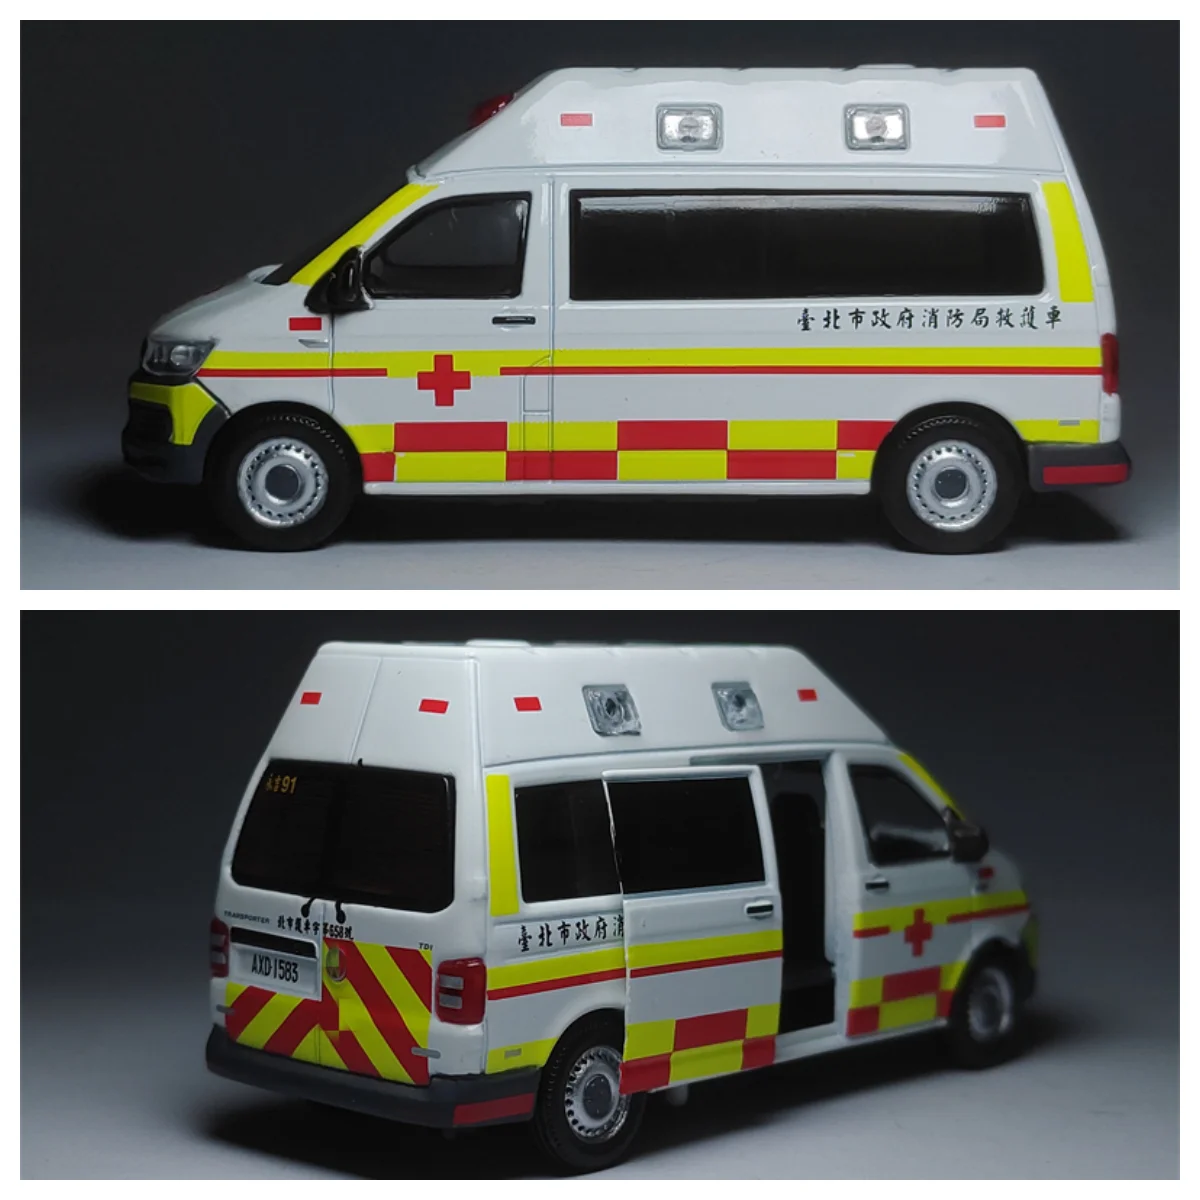 Tiny 1/64 T6 Transporter Ambulance Fire Department Die Cast Model Car Collection Limited